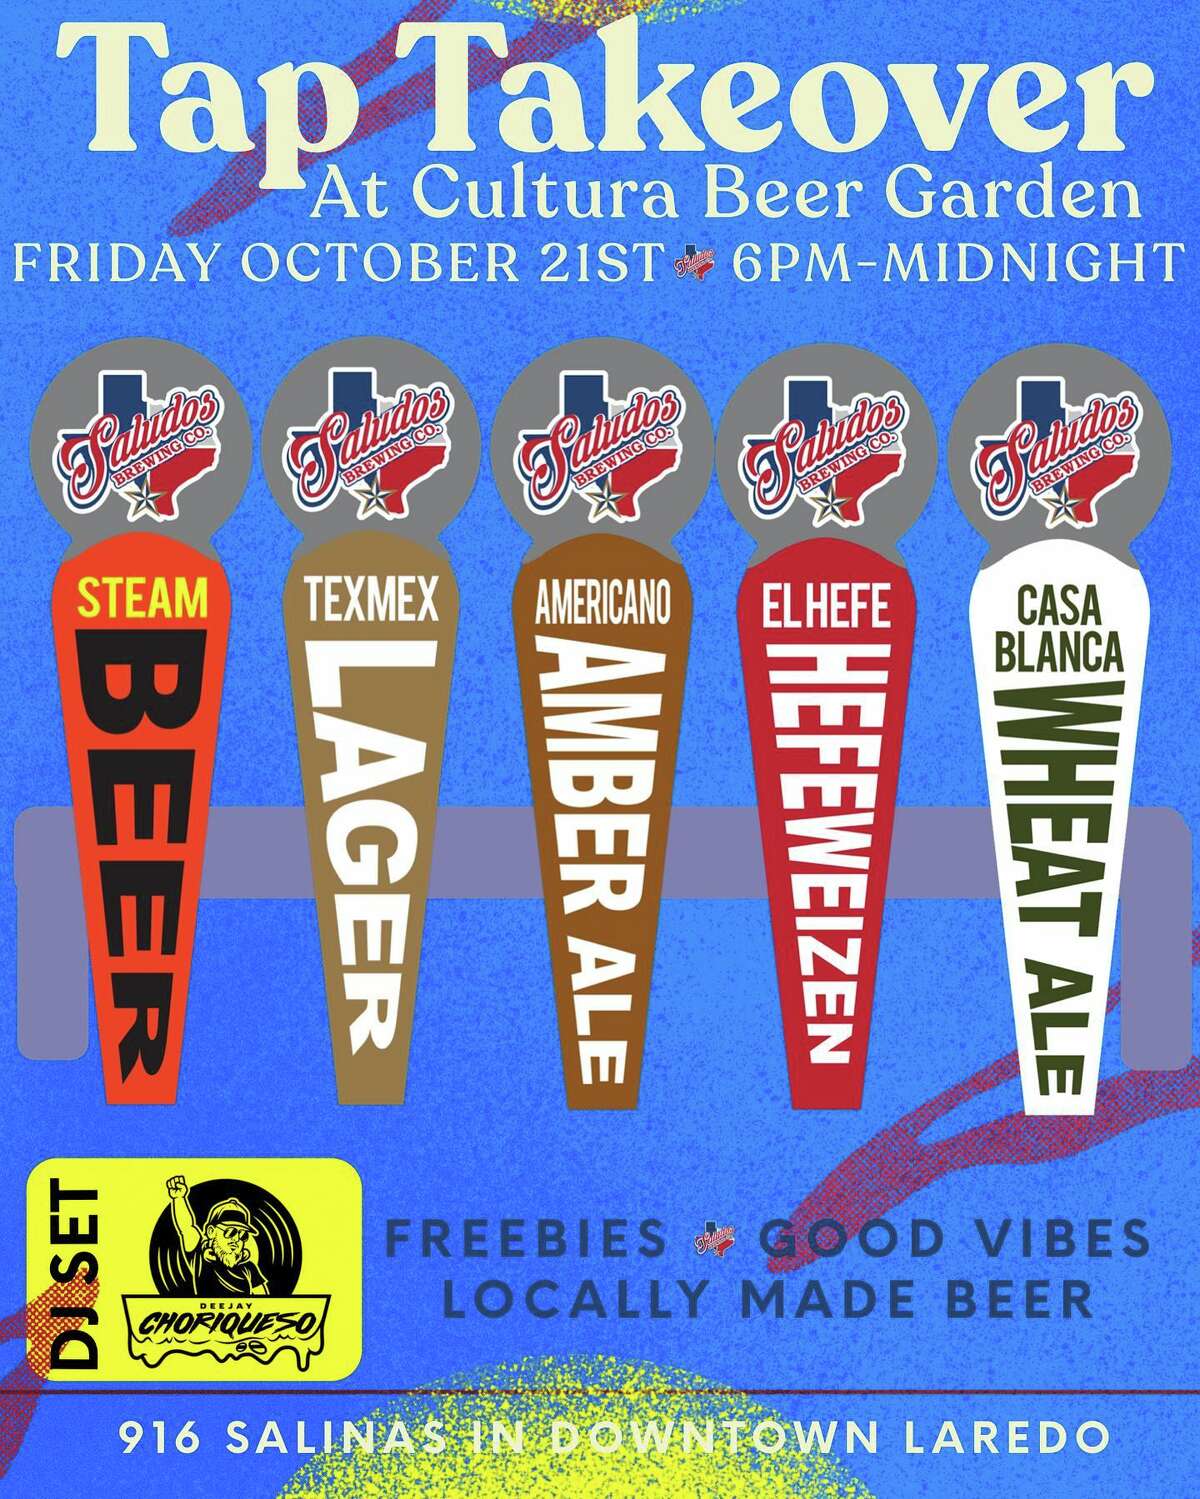 A flyer shows the beers available at the Saludos Brewing Co. tap takover at Cultura Beer Garden this Friday, October 21st.